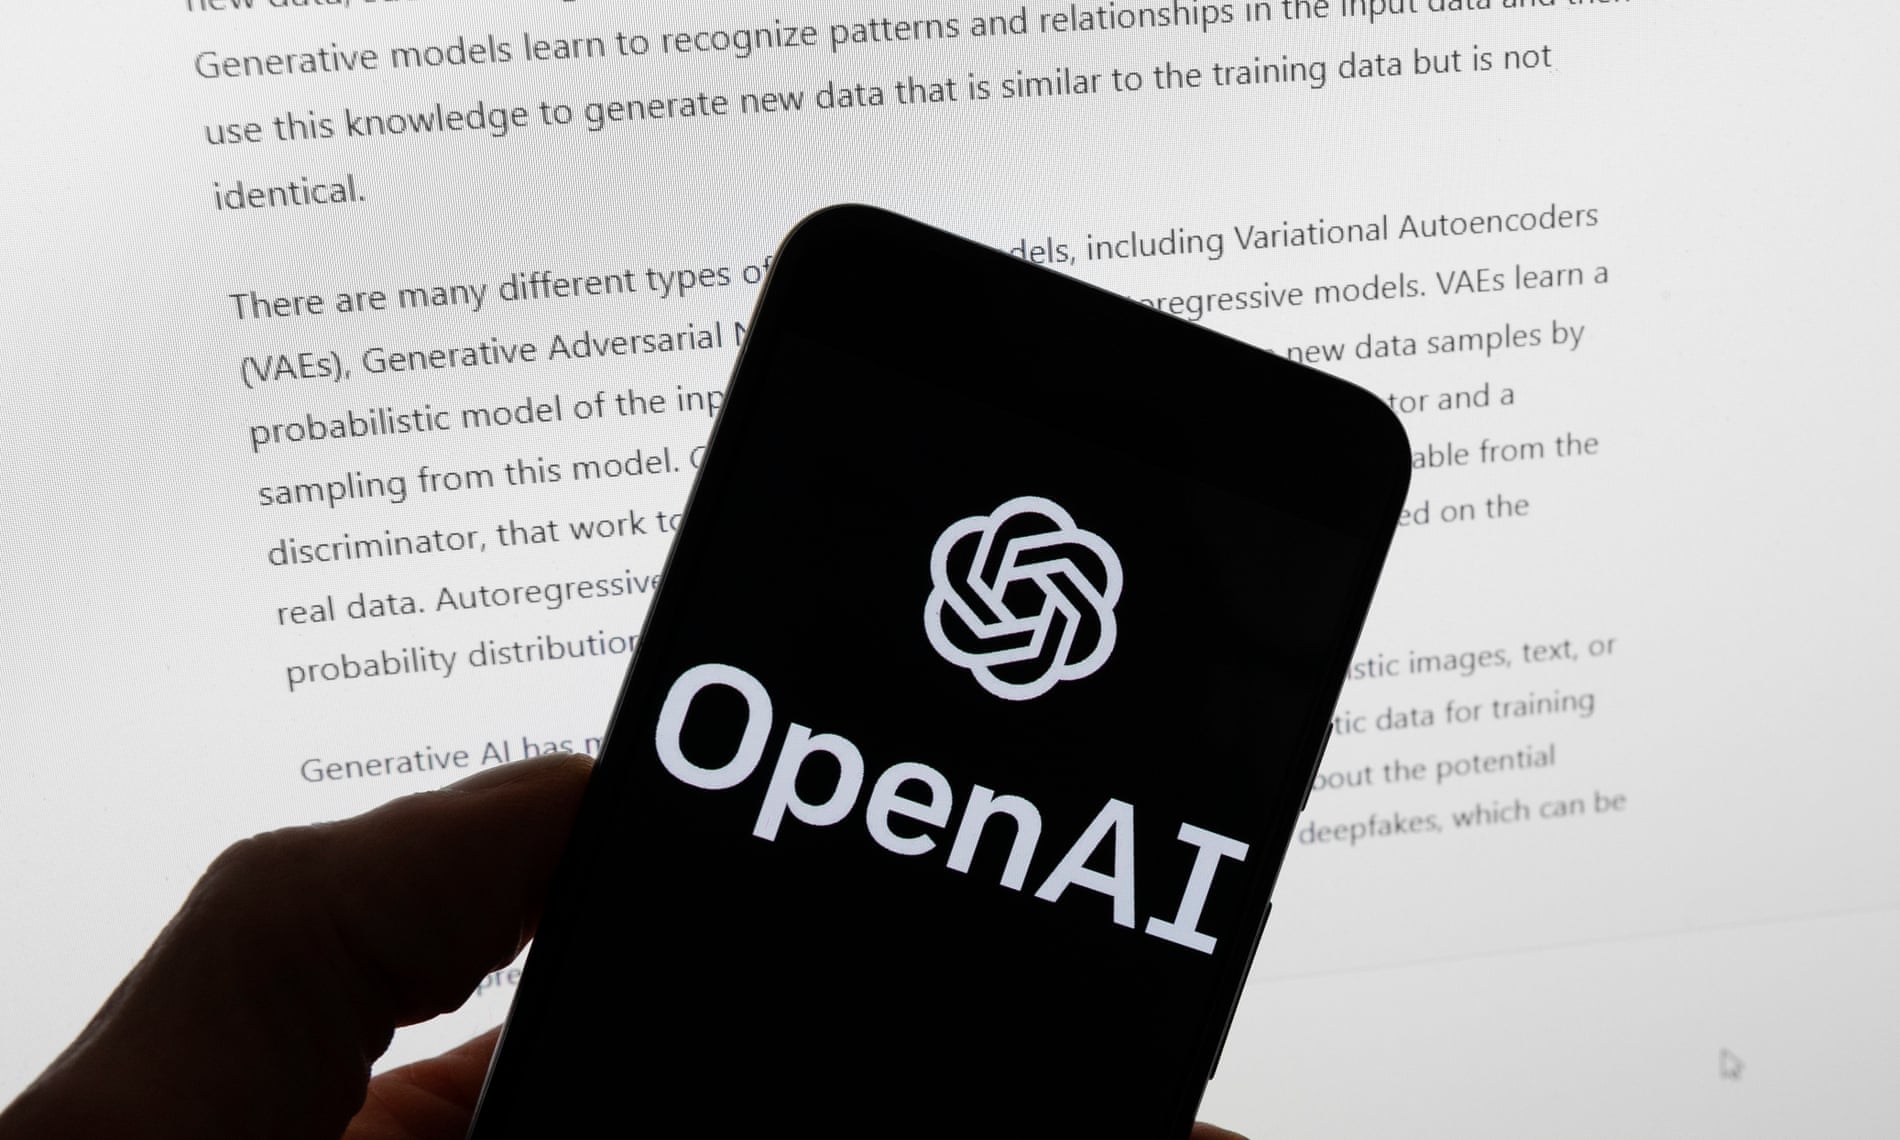 Will OpenAI actually open up? The heavily censored ChatGPT may join the civilized world and allow users to create AI-generated not-safe-for-work content, including actual … wait for it … ART 👍